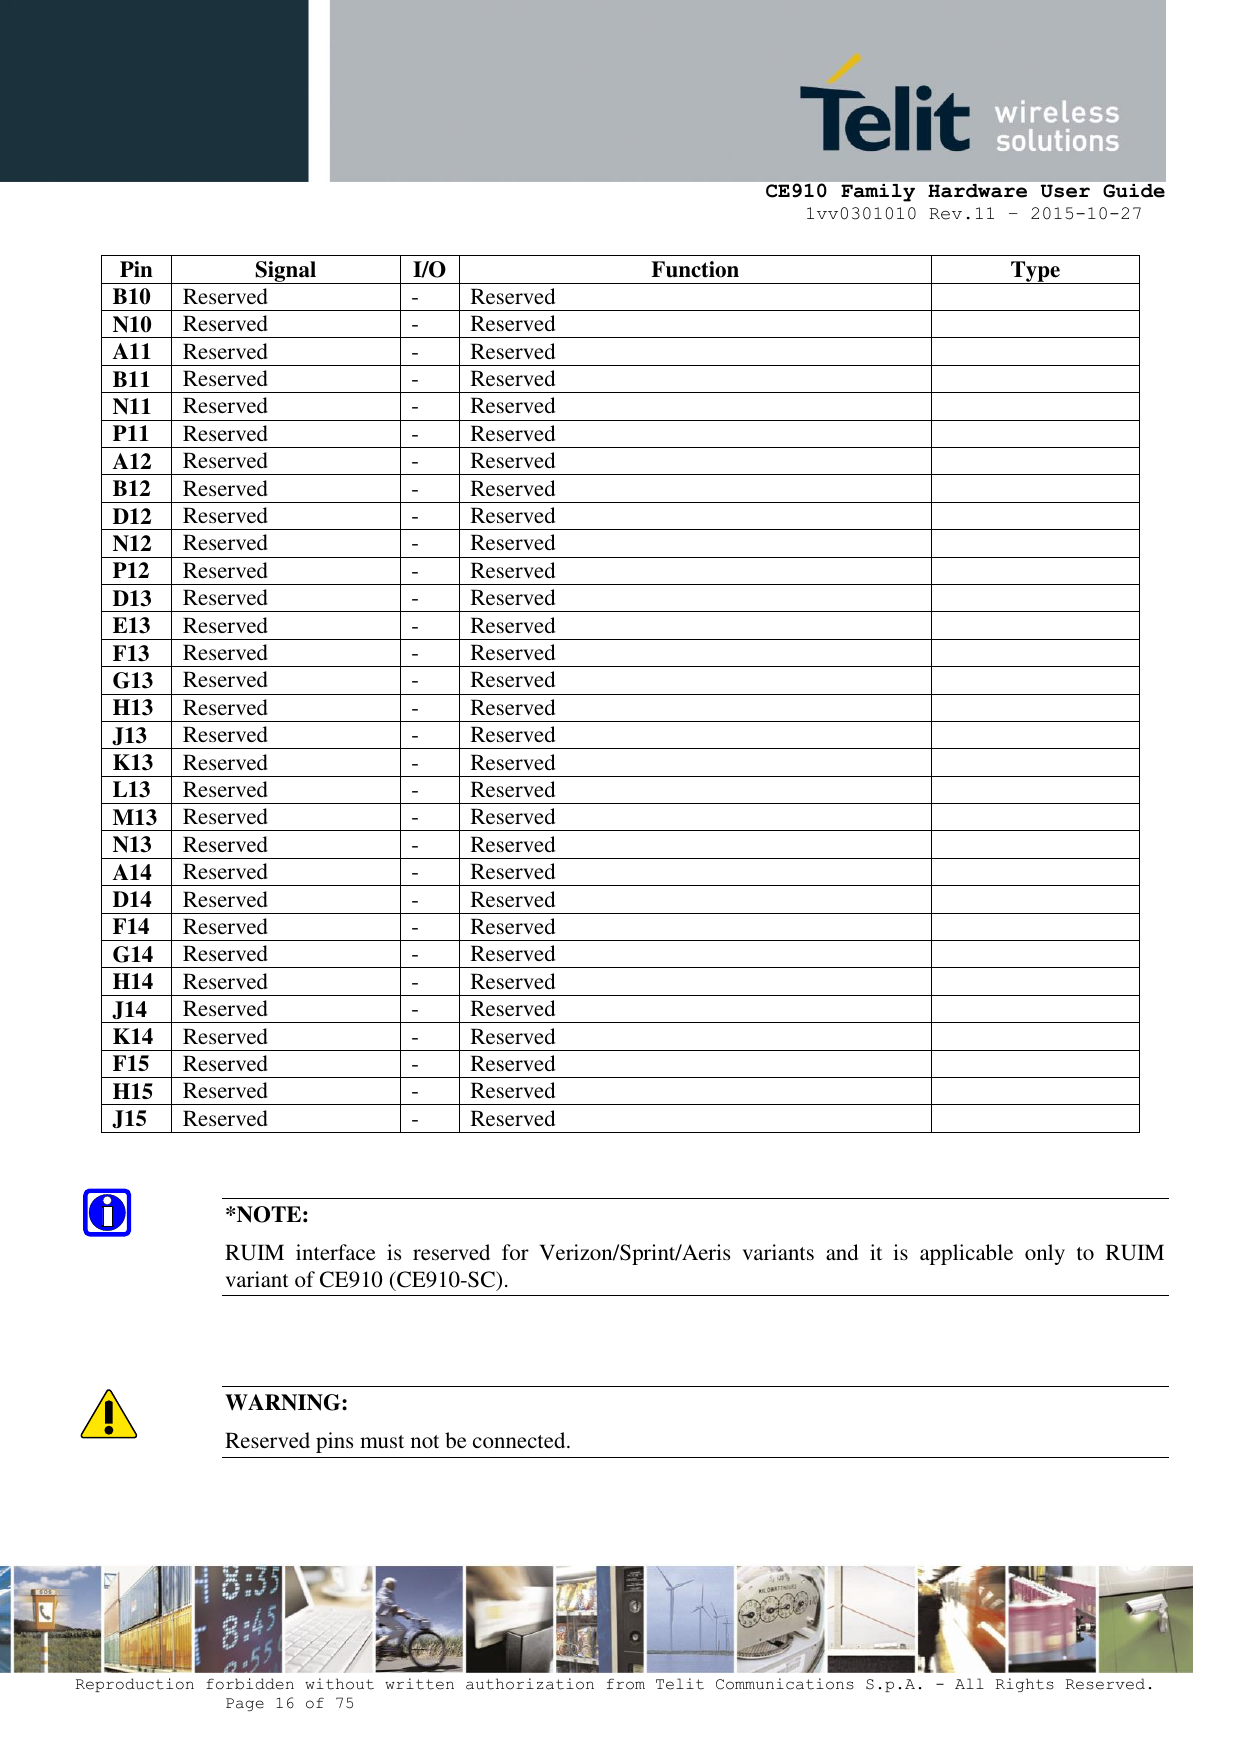     CE910 Family Hardware User Guide 1vv0301010 Rev.11 – 2015-10-27 Reproduction forbidden without written authorization from Telit Communications S.p.A. - All Rights Reserved.    Page 16 of 75                                                     Pin Signal I/O Function Type B10 Reserved - Reserved  N10 Reserved - Reserved  A11 Reserved - Reserved  B11 Reserved - Reserved  N11 Reserved - Reserved  P11 Reserved - Reserved  A12 Reserved - Reserved  B12 Reserved - Reserved  D12 Reserved - Reserved  N12 Reserved - Reserved  P12 Reserved - Reserved  D13 Reserved - Reserved  E13 Reserved - Reserved  F13 Reserved - Reserved  G13 Reserved - Reserved  H13 Reserved - Reserved  J13 Reserved - Reserved  K13 Reserved - Reserved  L13 Reserved - Reserved  M13 Reserved - Reserved  N13 Reserved - Reserved  A14 Reserved - Reserved  D14 Reserved - Reserved  F14 Reserved - Reserved  G14 Reserved - Reserved  H14 Reserved - Reserved  J14 Reserved - Reserved  K14 Reserved - Reserved  F15 Reserved - Reserved  H15 Reserved - Reserved  J15 Reserved - Reserved    *NOTE: RUIM  interface  is  reserved  for  Verizon/Sprint/Aeris  variants  and  it  is  applicable  only  to  RUIM variant of CE910 (CE910-SC).   WARNING: Reserved pins must not be connected.   